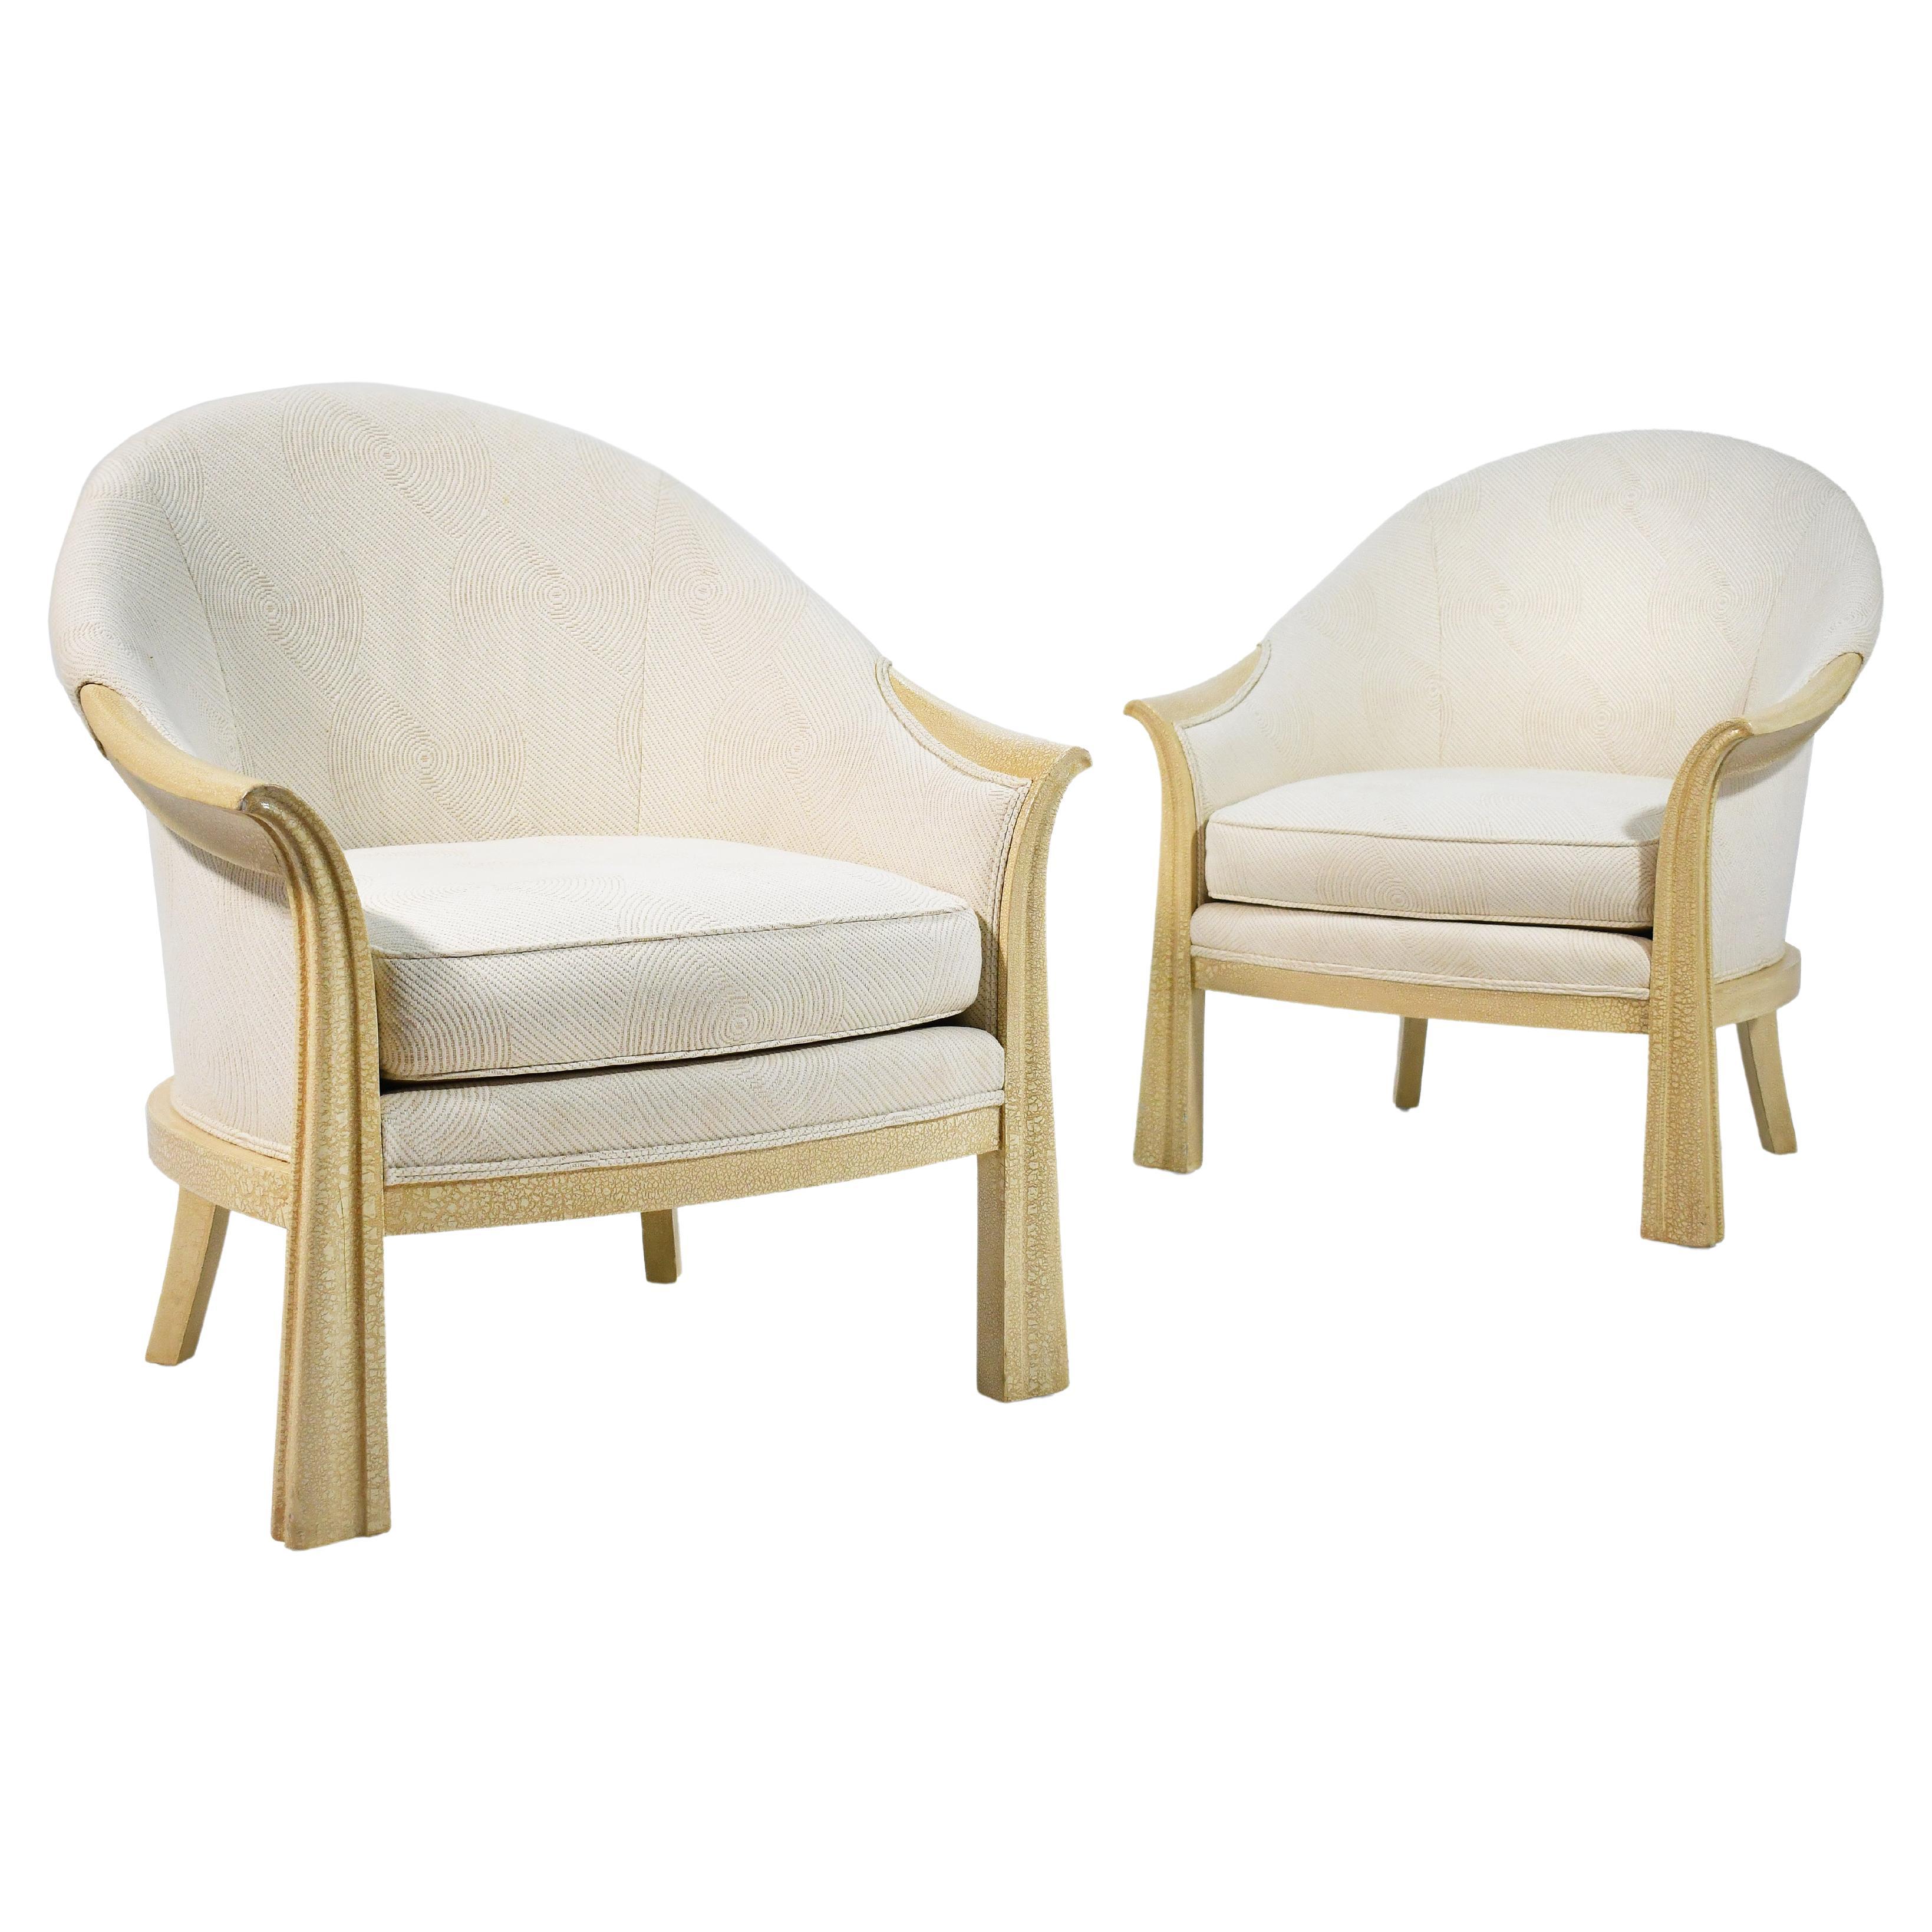 Pair of Lounge Chairs in the Manner of Pierre Chareau